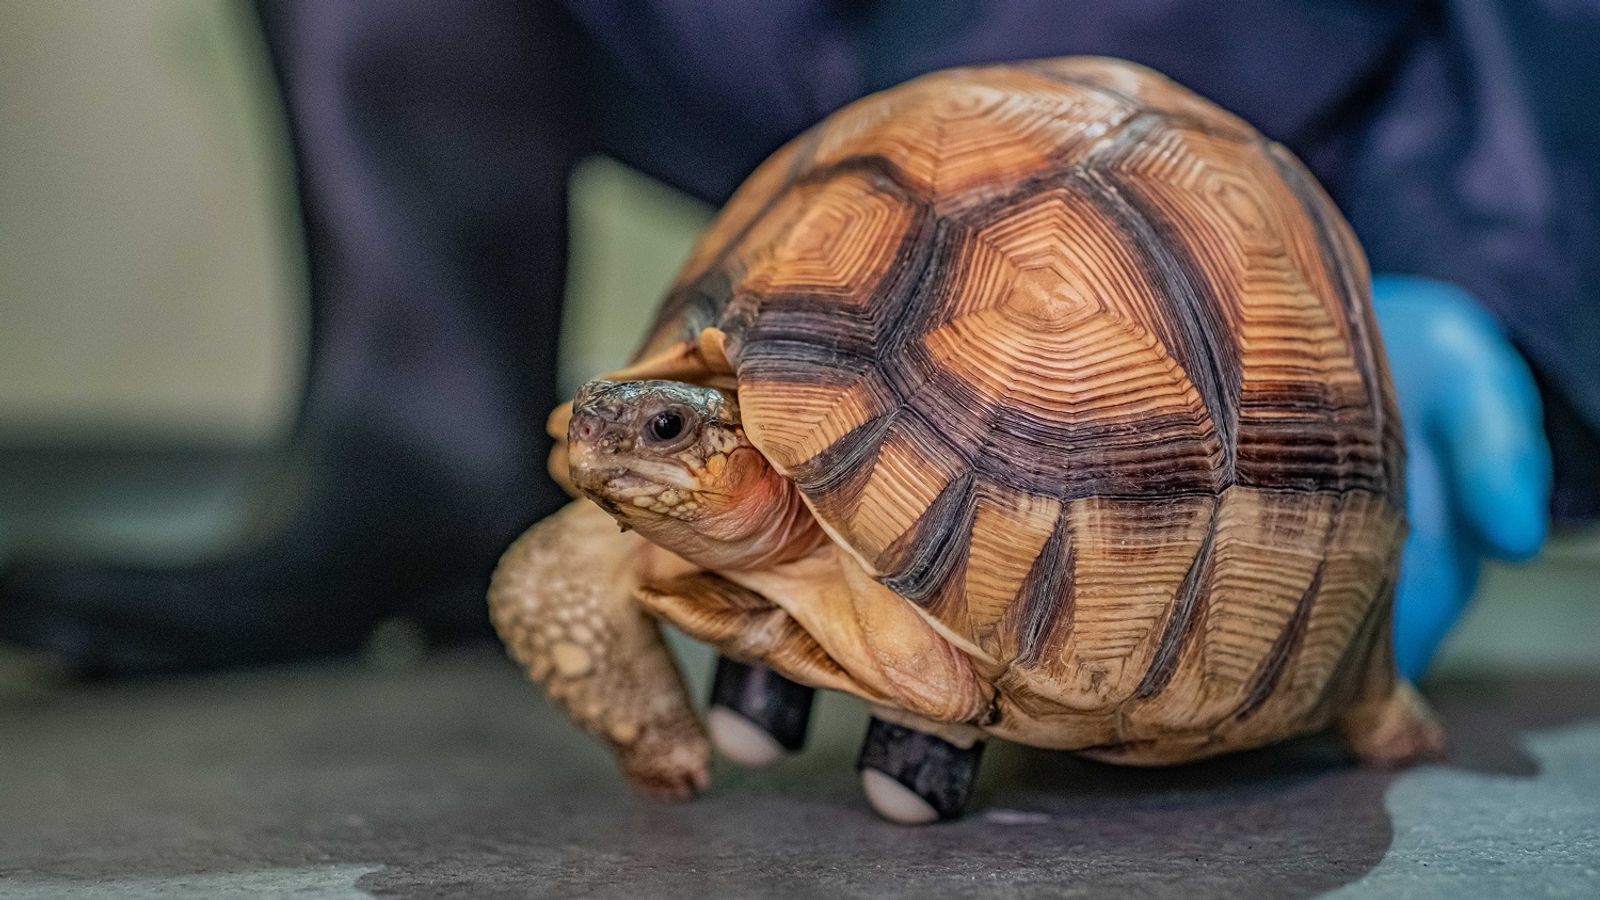 Three-legged tortoise called Hope who gets around on wheels could help save critically endangered species